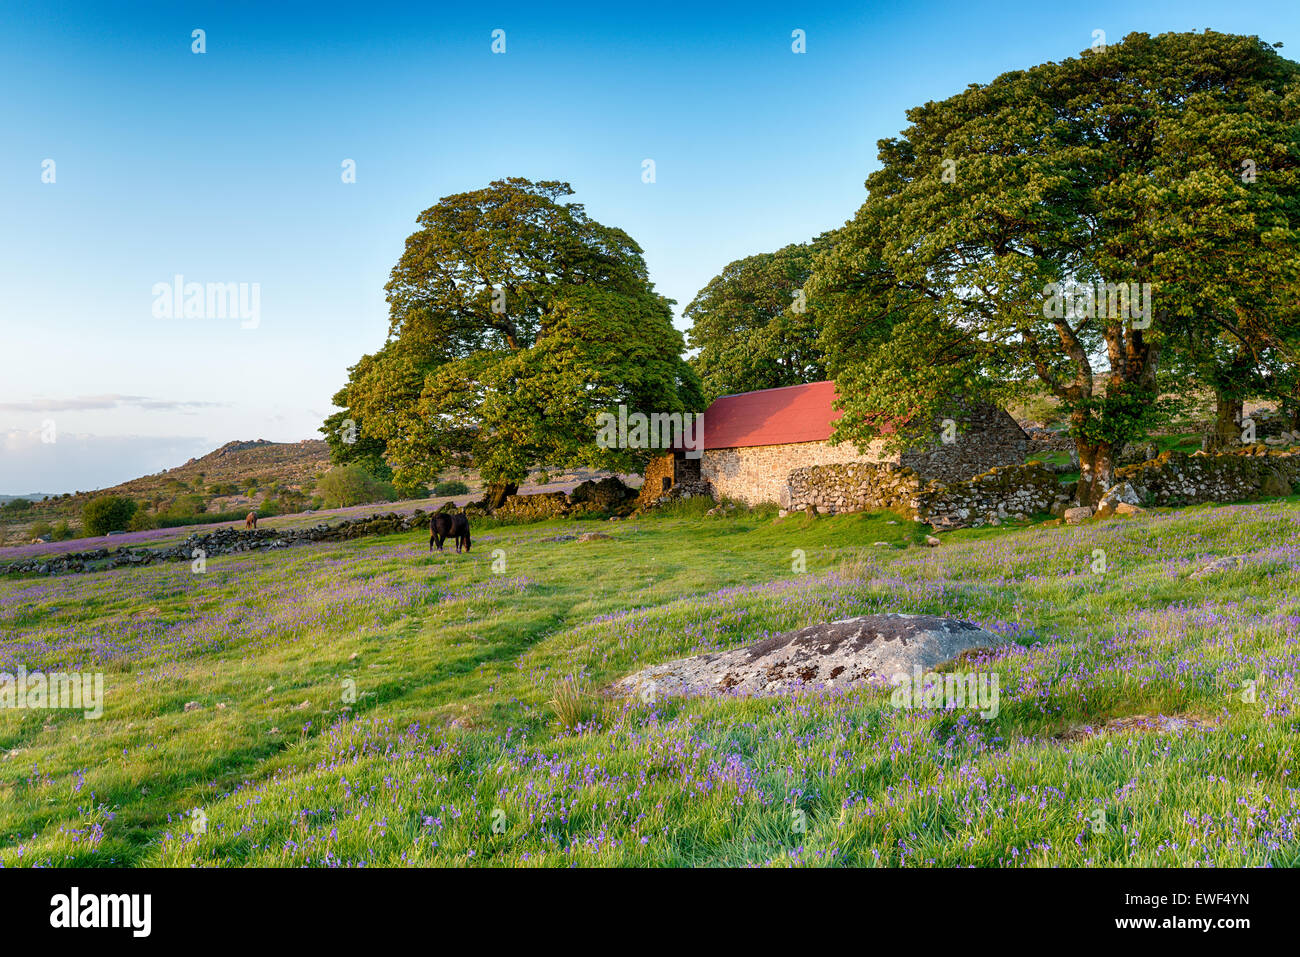 Dartmoor ponies grazing in a bluebell meadow by an old red roofed barn Stock Photo